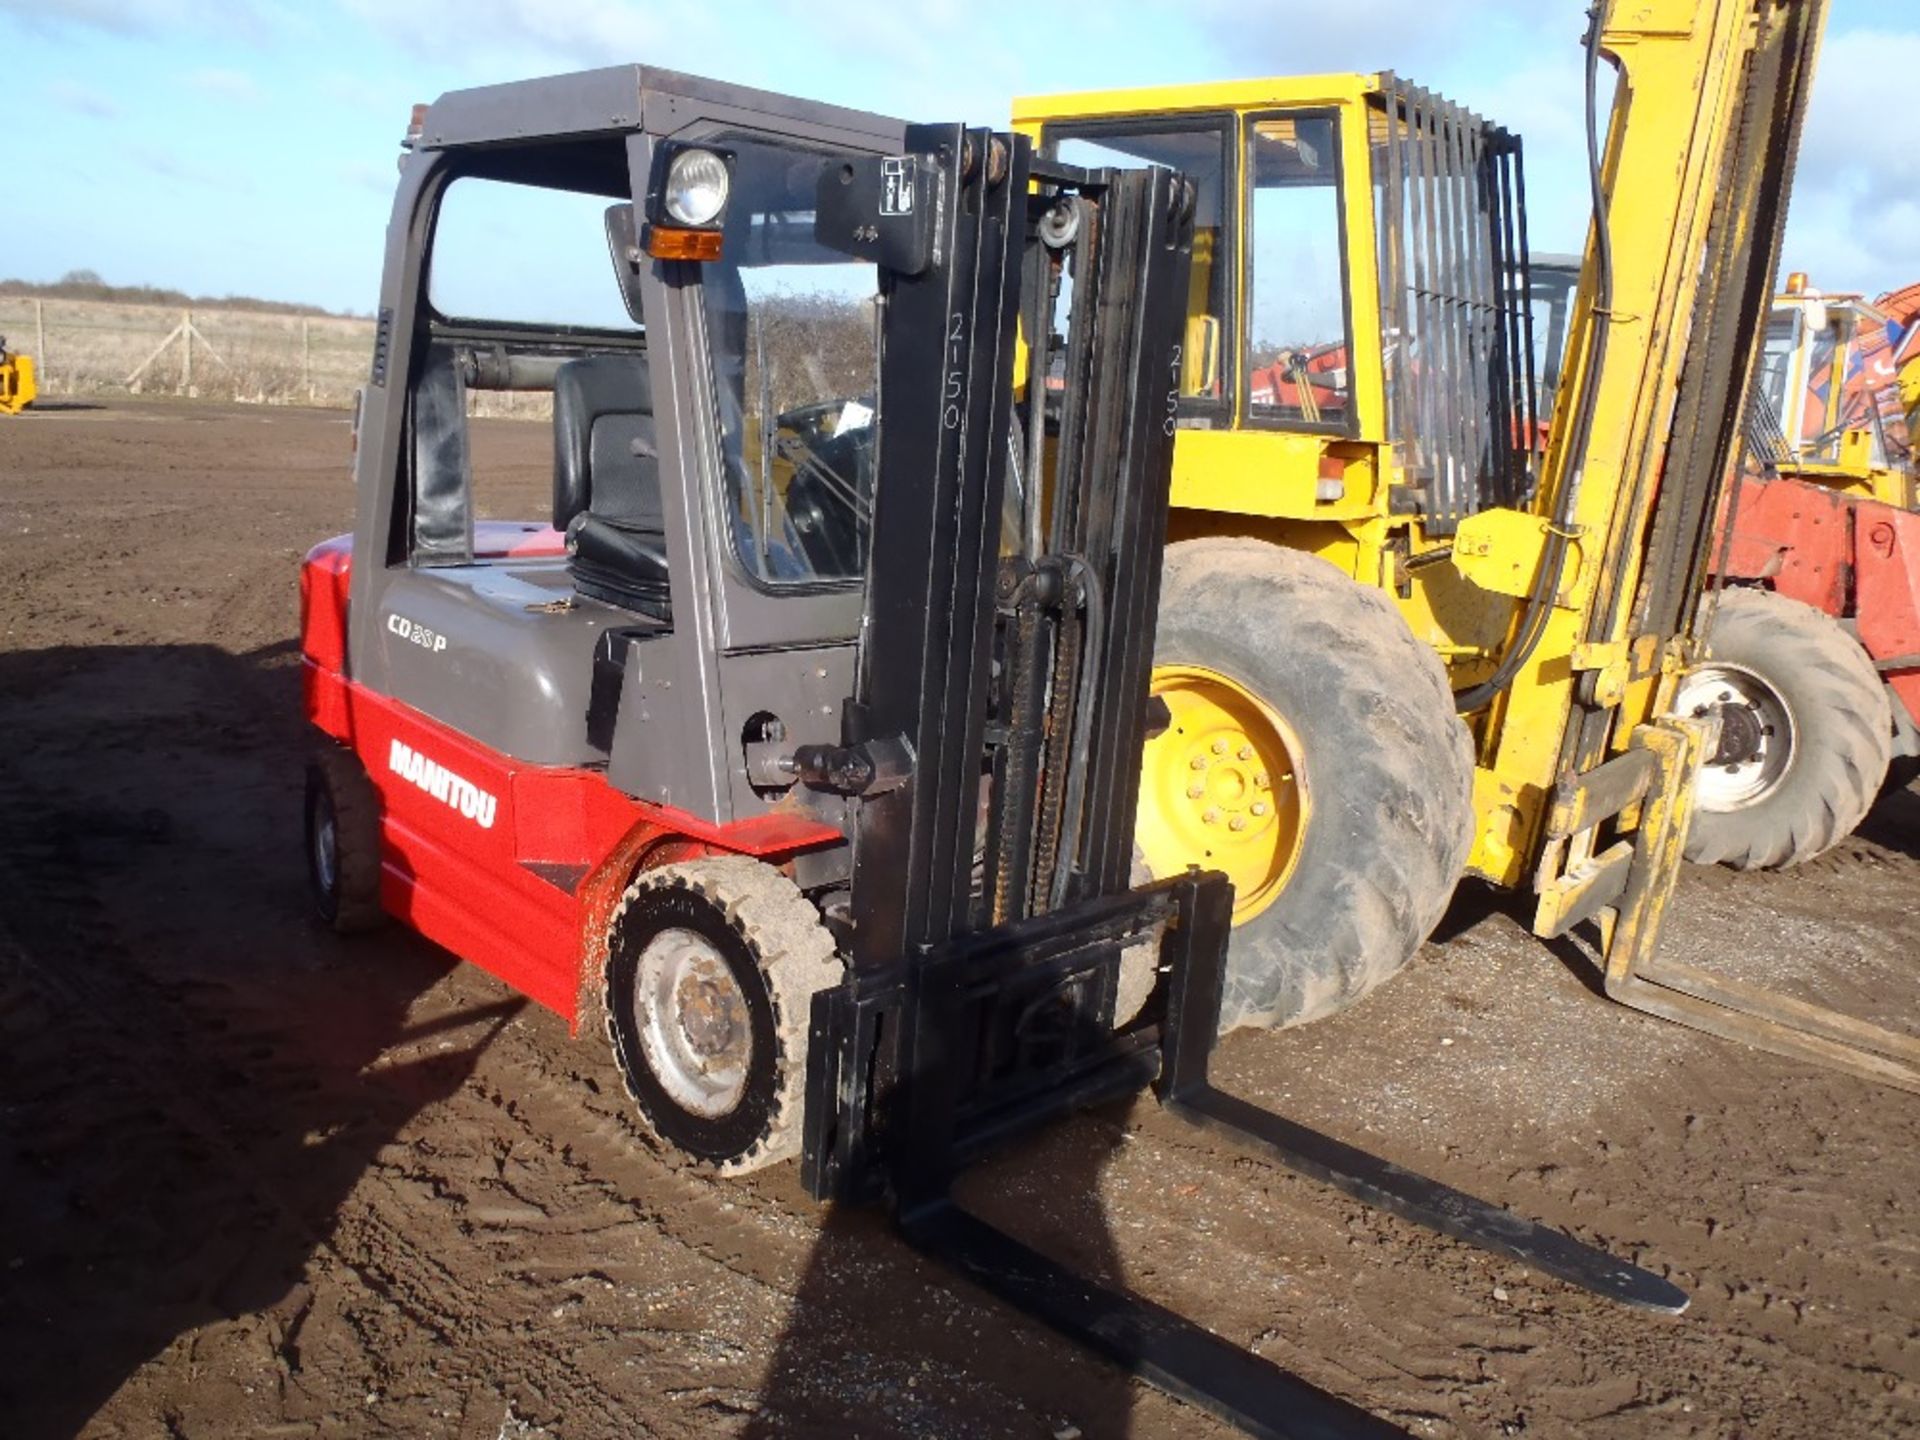 Manitou CD20P Forklift with 3 Stage Free Lift Mast, Side Shift, Forks. Serial No. 850552 - Image 2 of 4